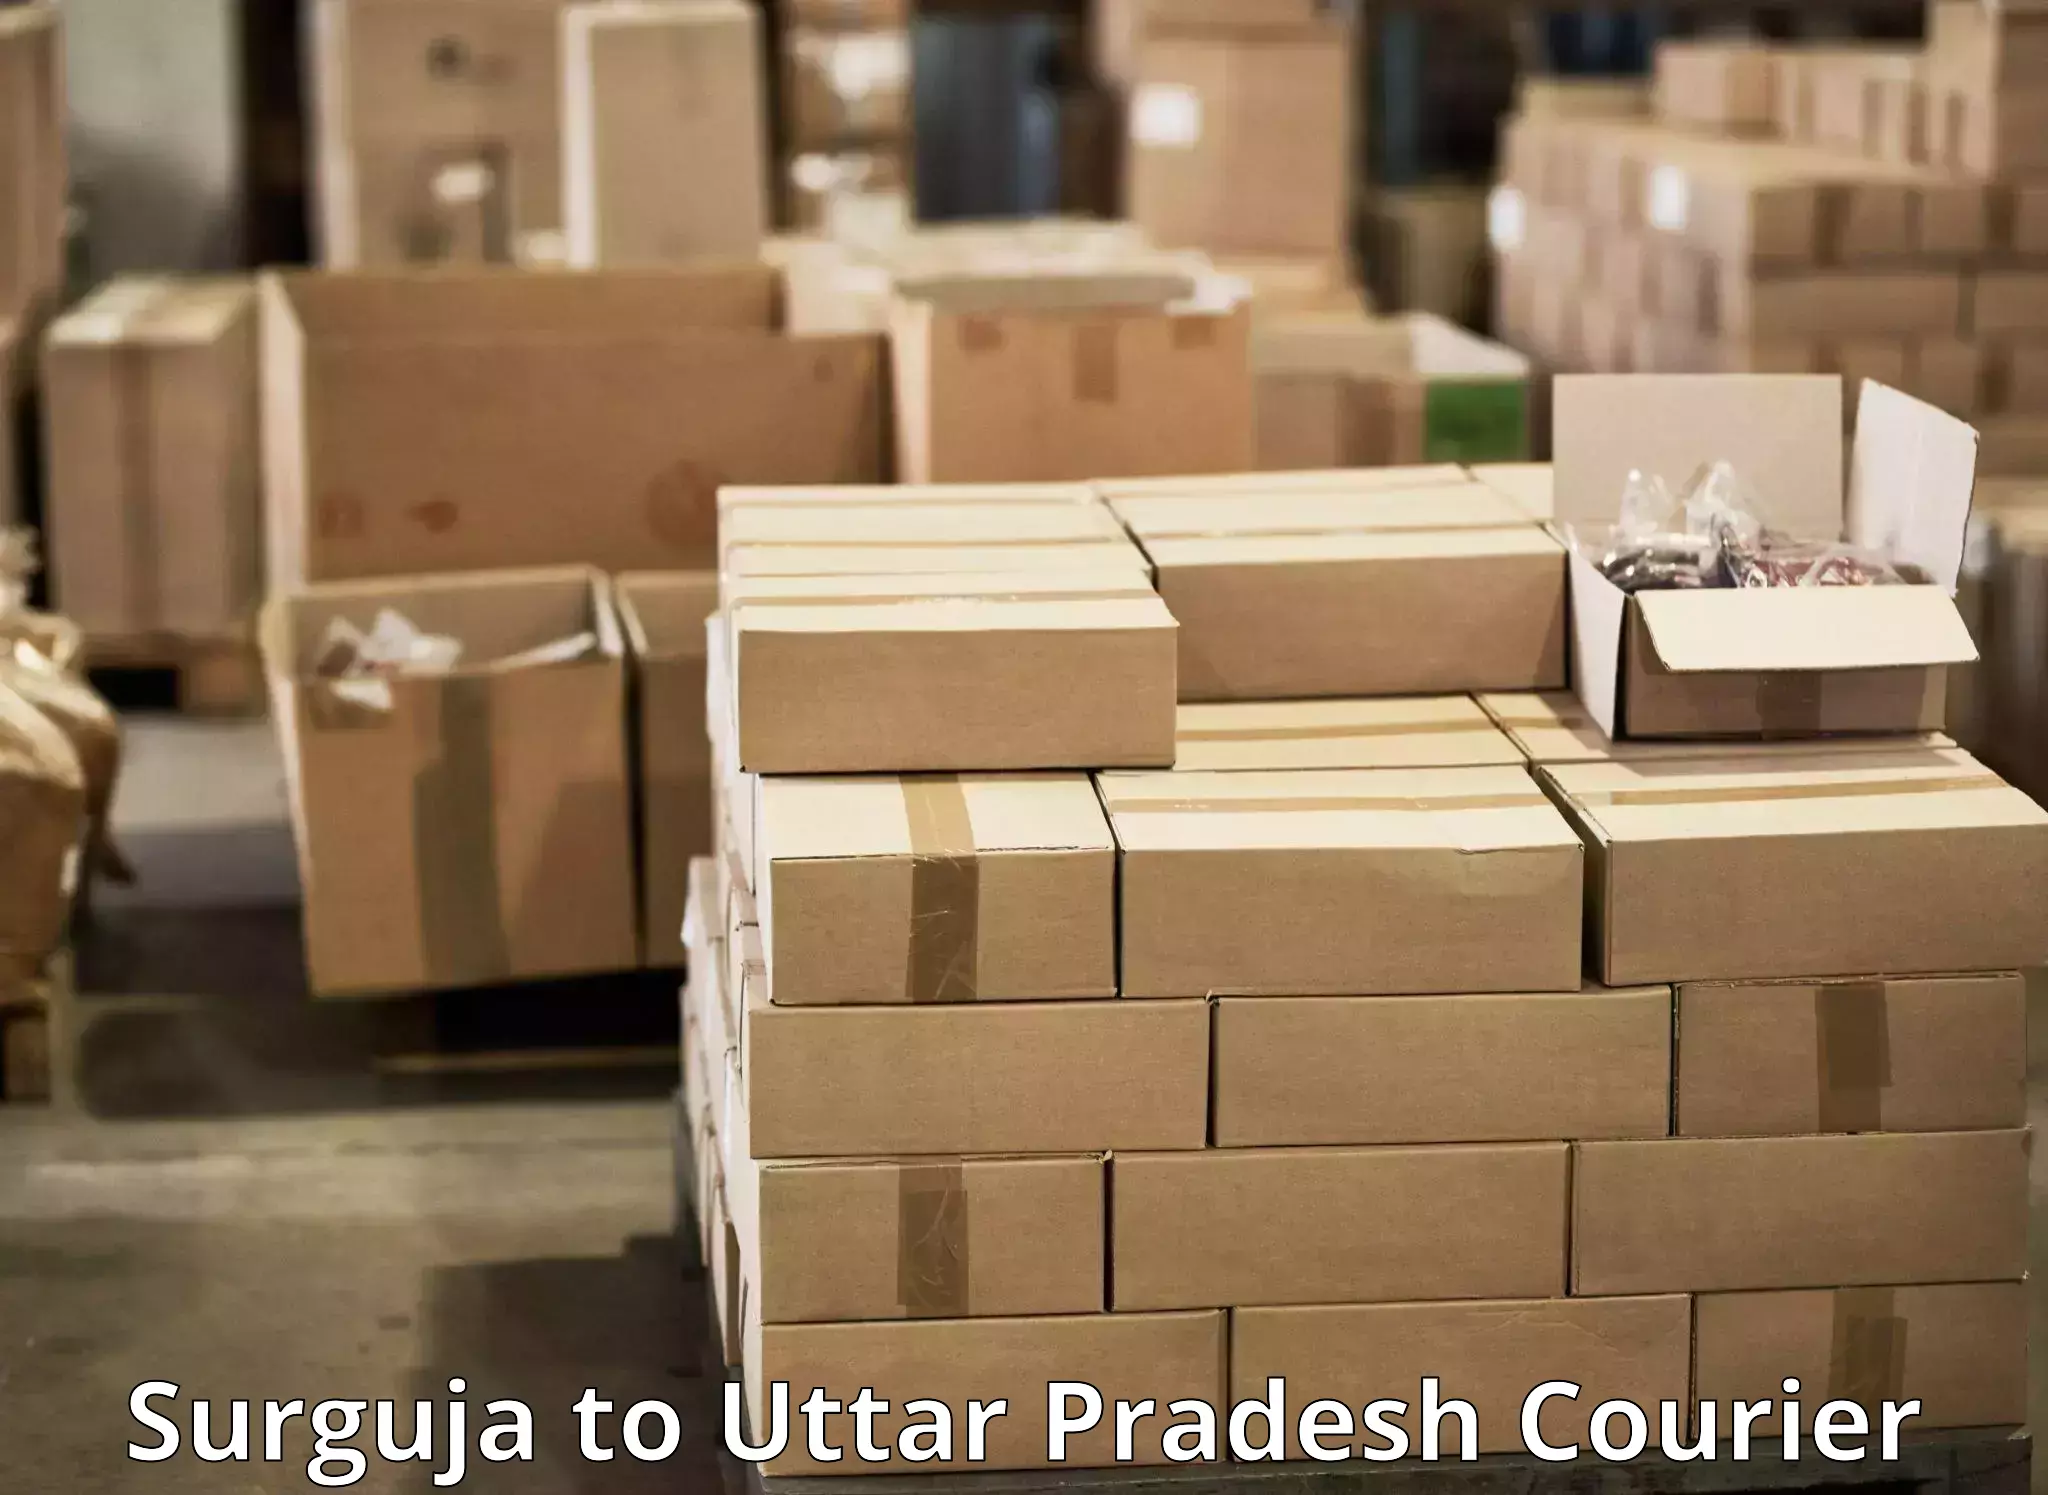 Pharmaceutical courier Surguja to IIIT Lucknow